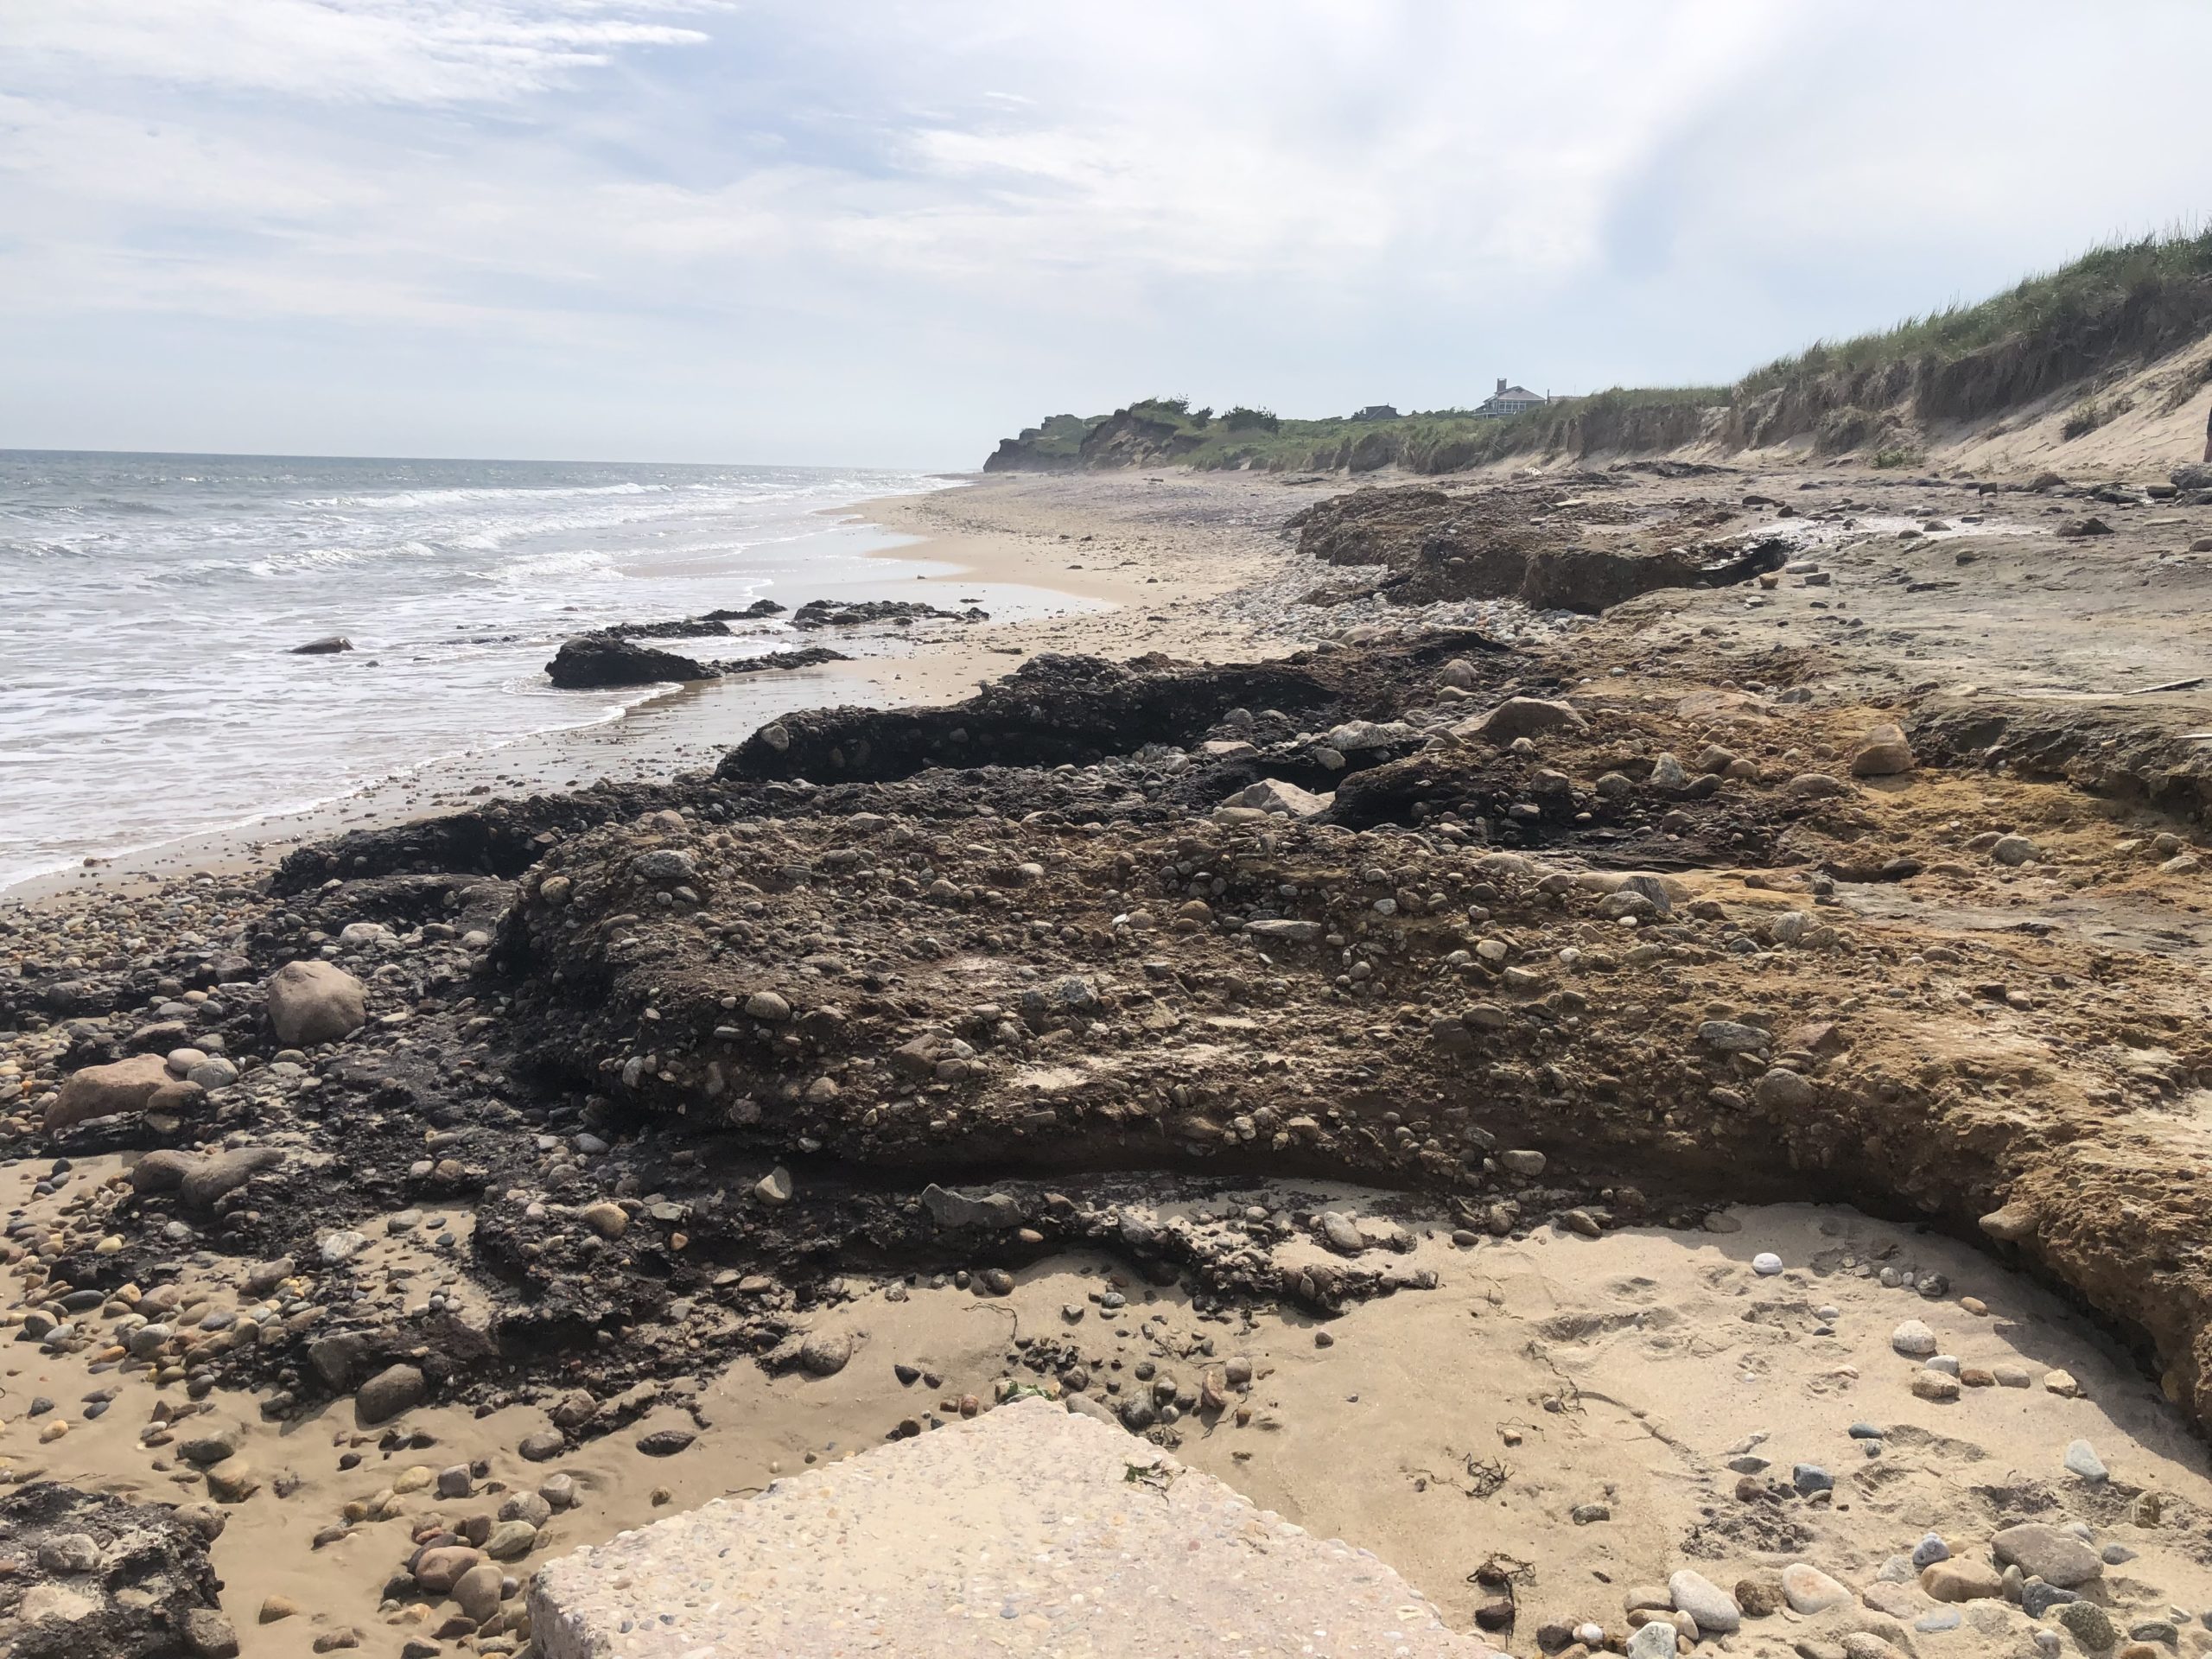 Ditch Plains beach in Montauk was scoured of nearly all of its sand by the Memorial Day weekend storm, leaving town officials to consider trucking in tons of sand to try and restore at least some of the bathing beach before the height of the summer season.